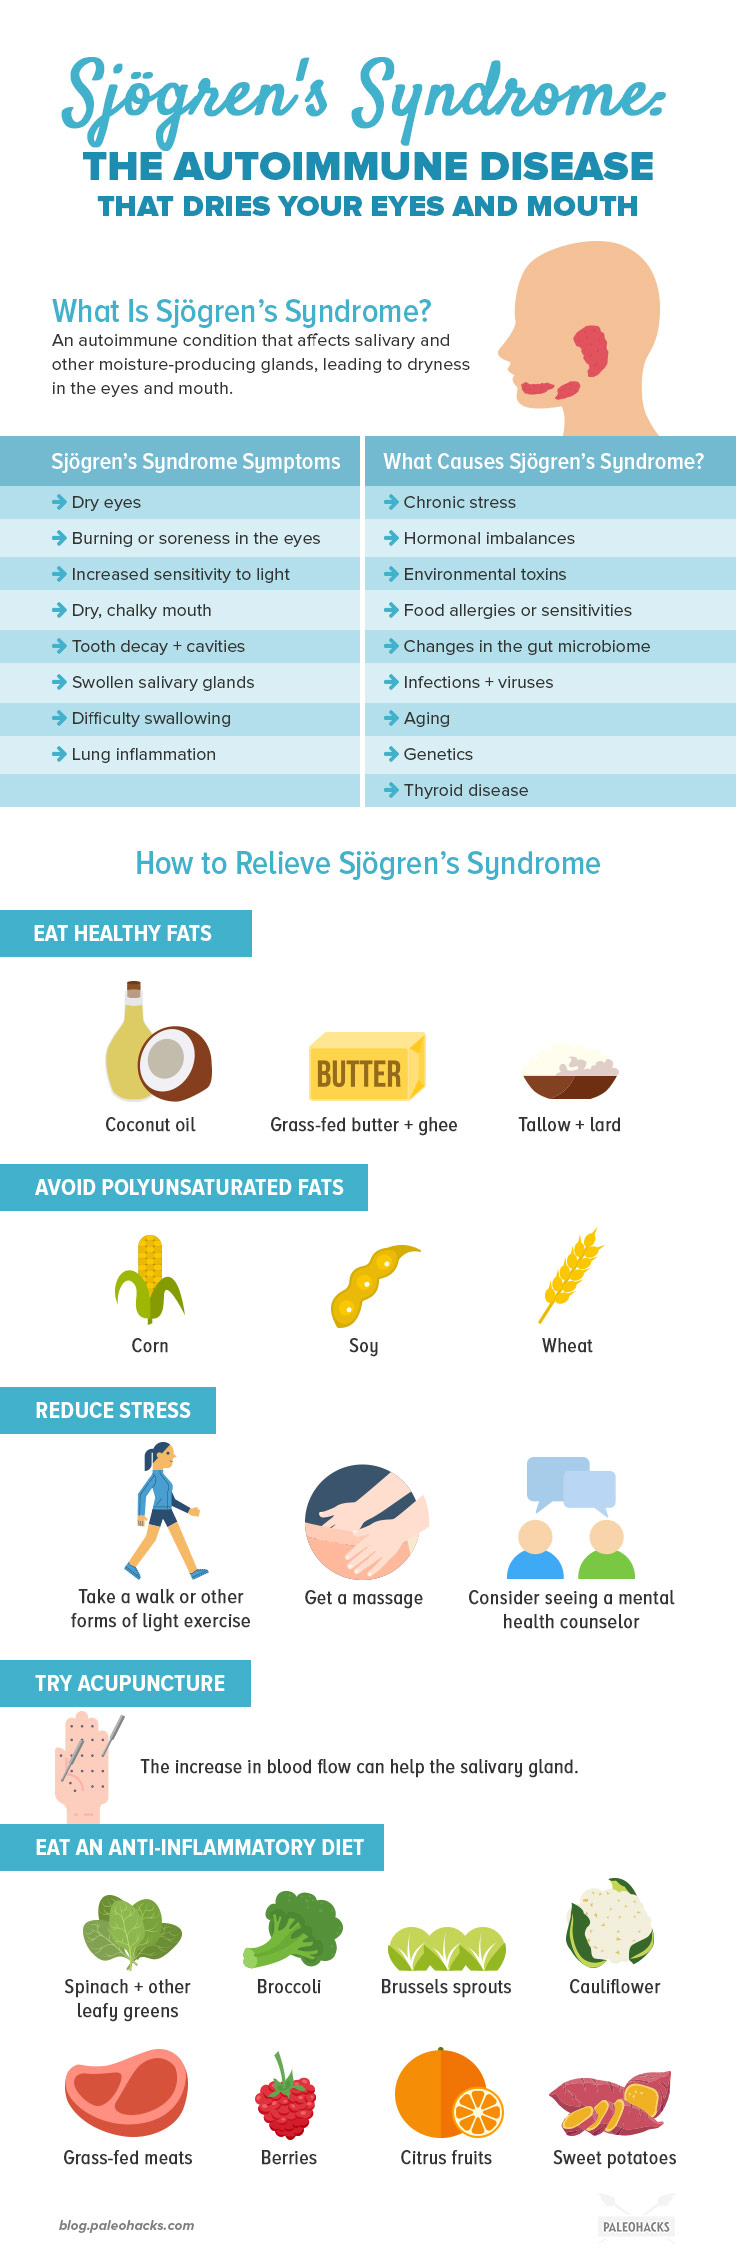 If your eyes and mouth are chronically dry, it might be a sign of a condition called Sjögren’s syndrome.